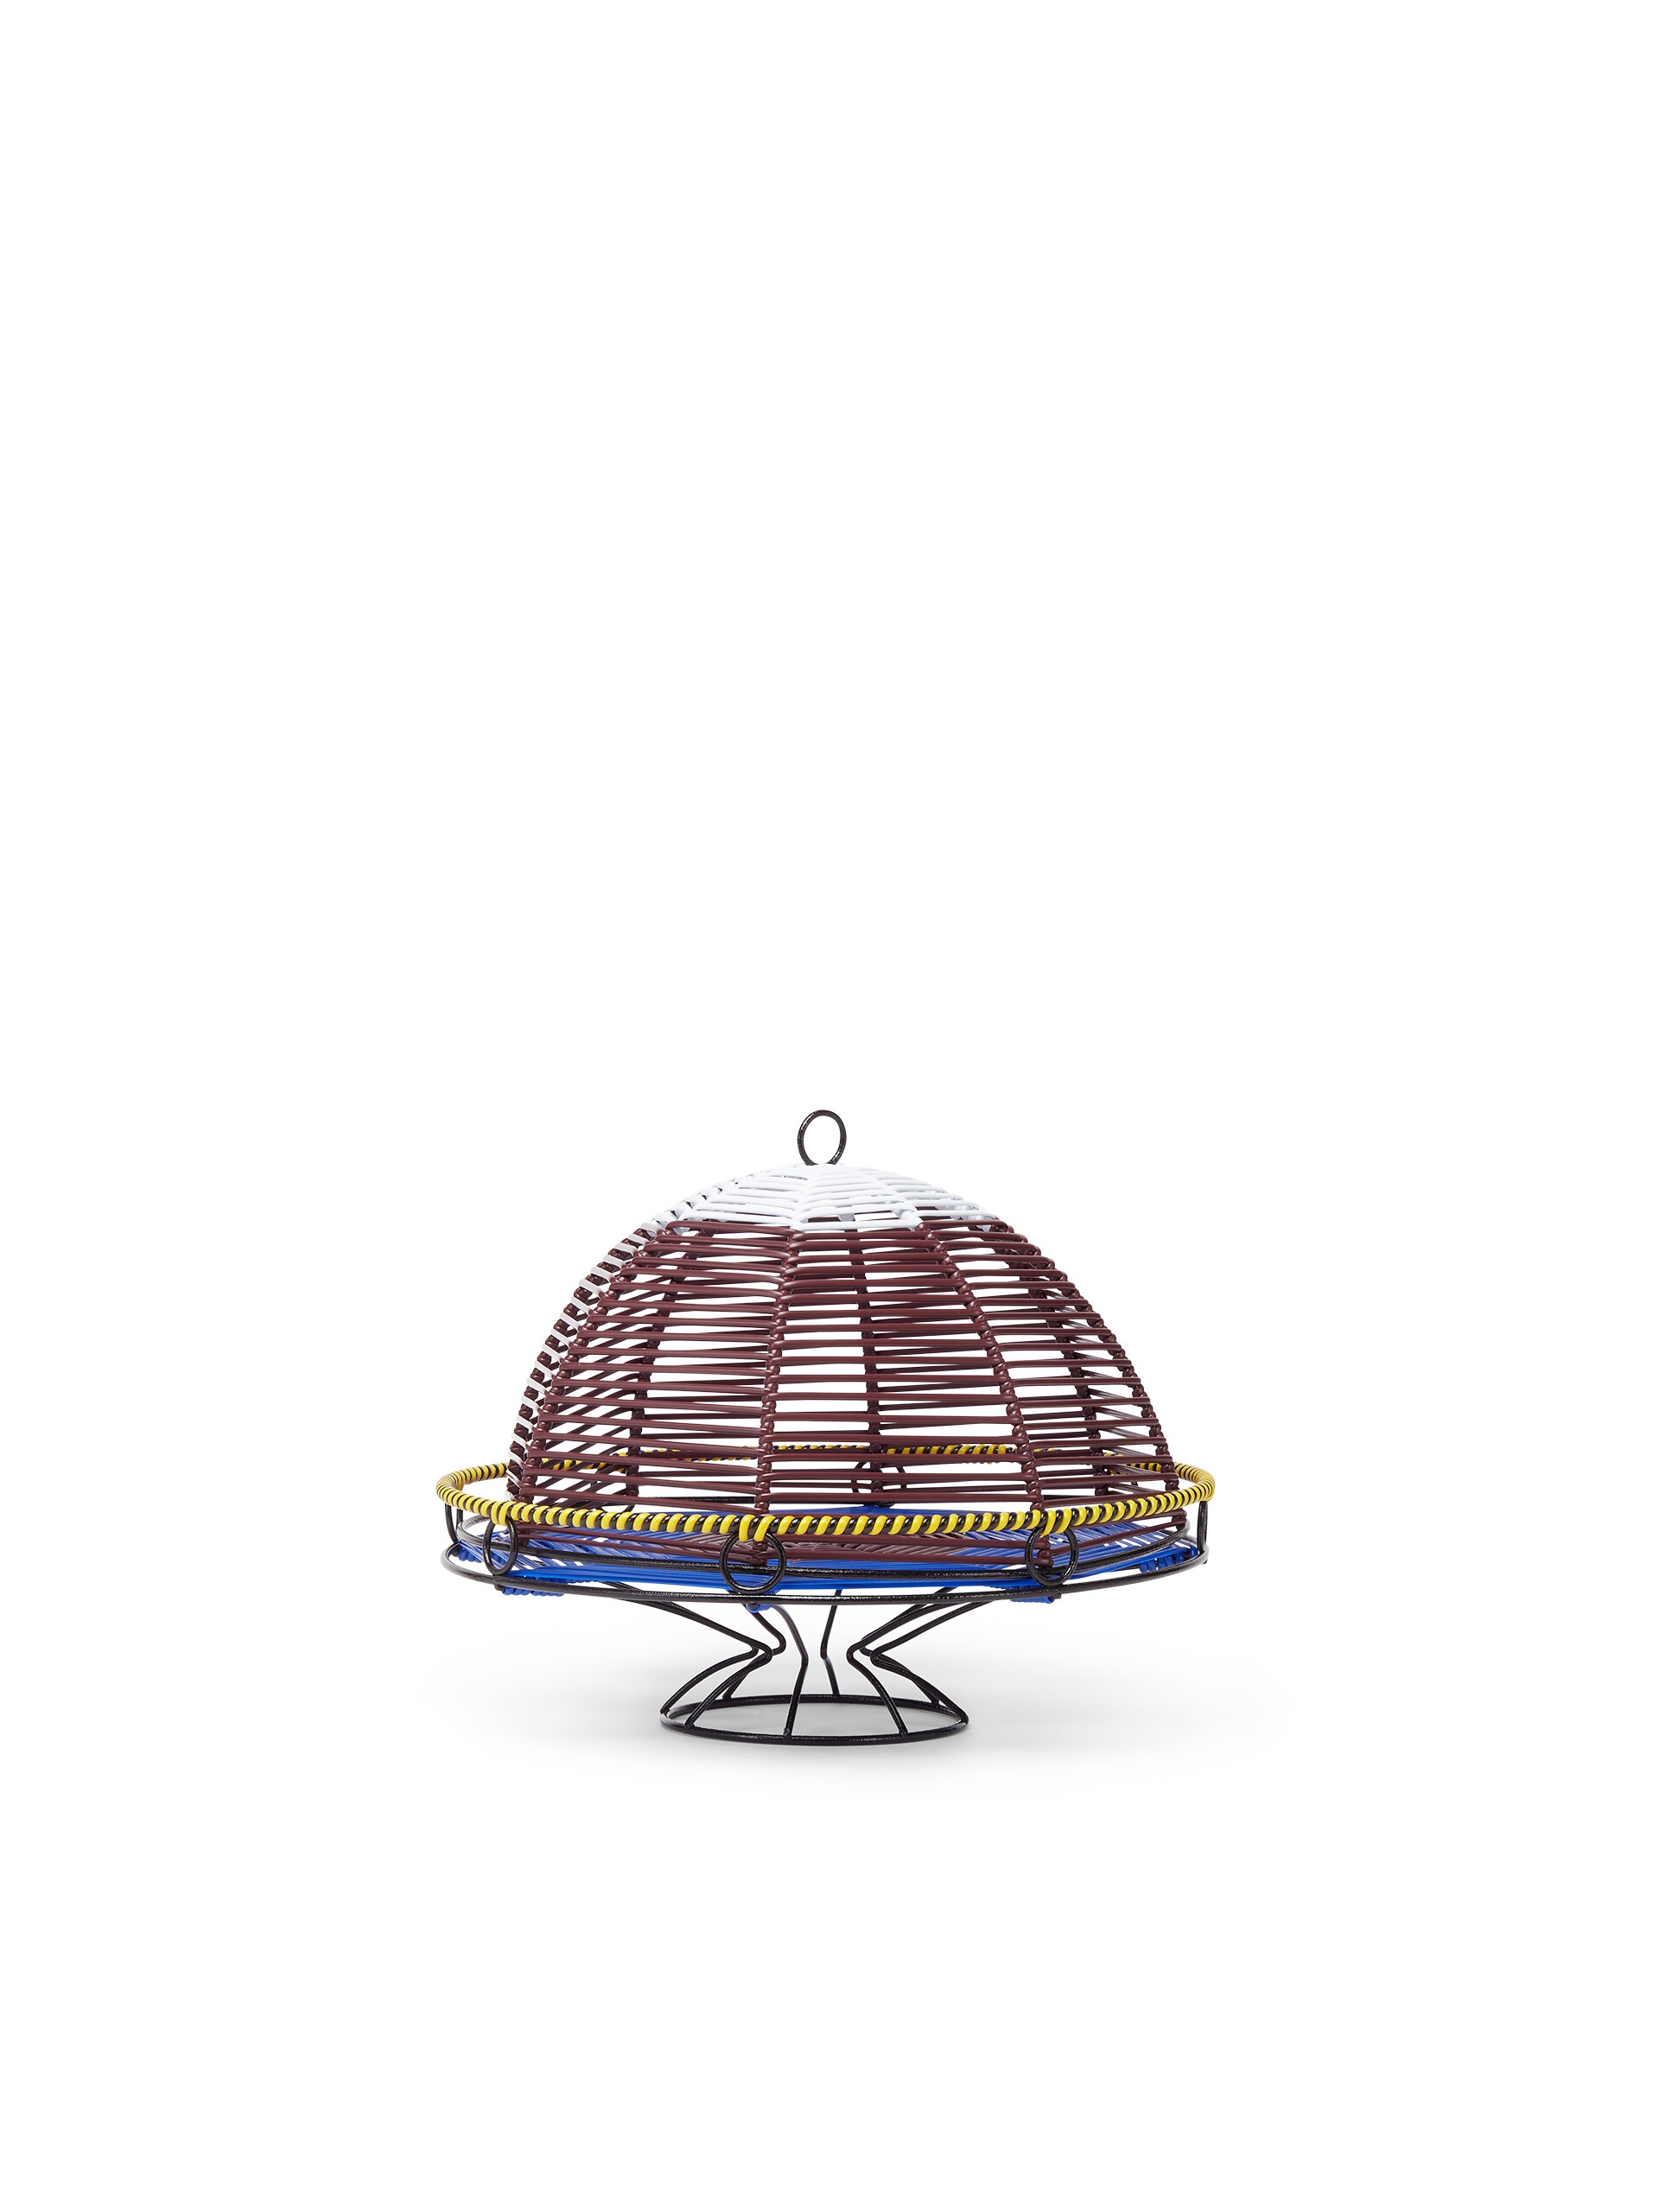 MARNI MARKET BROWN AND BLUE CAKE STAND - 2